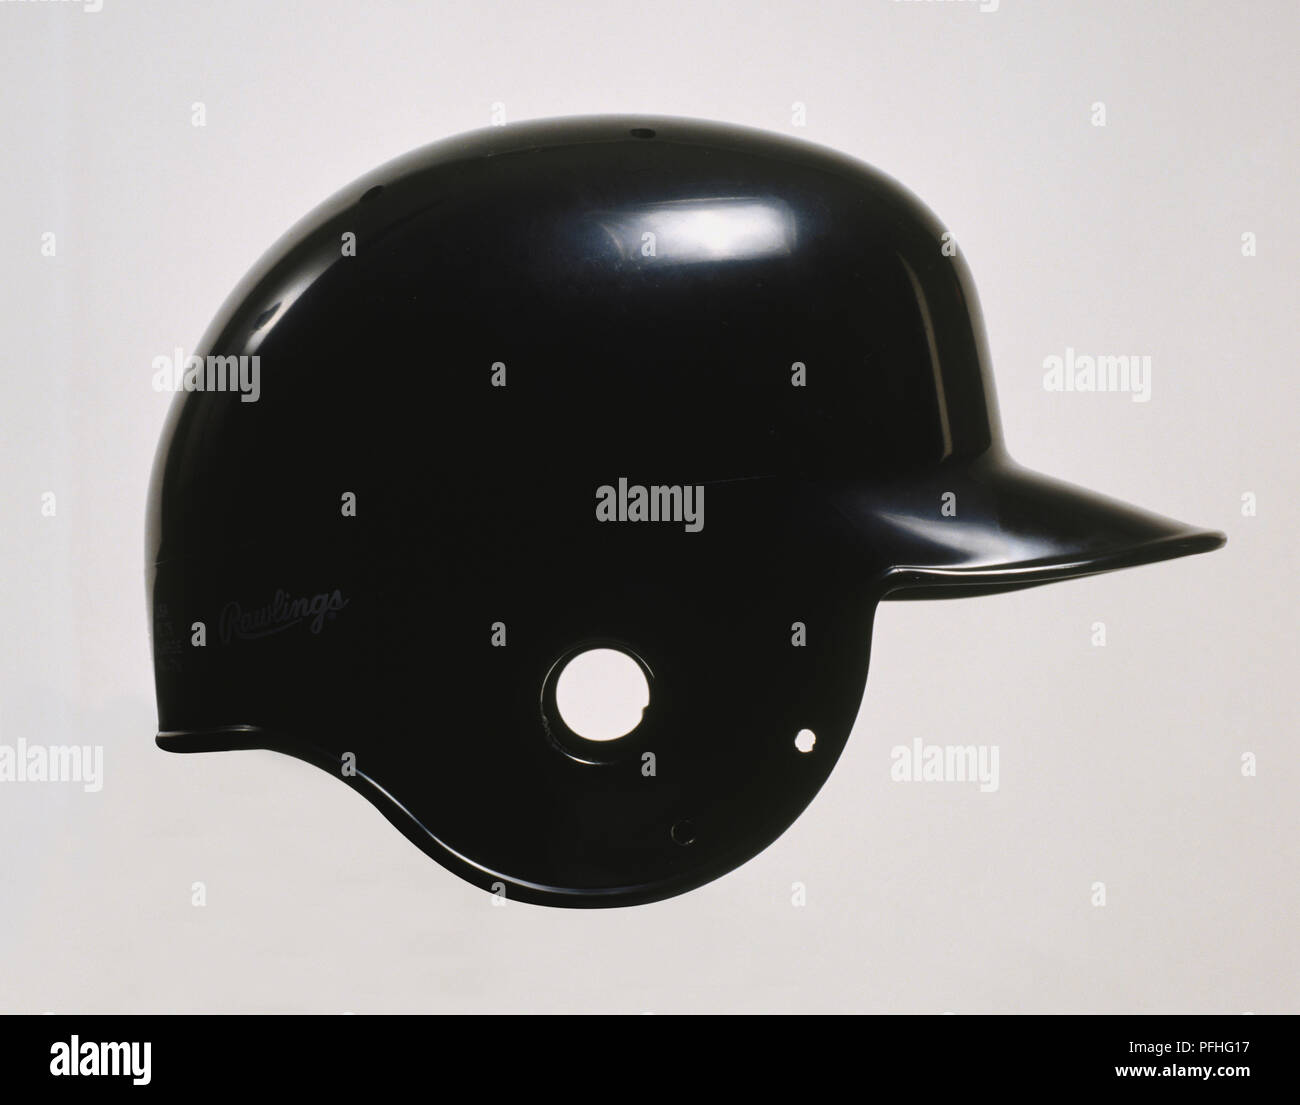 Black helmet viewed from the side. Stock Photo